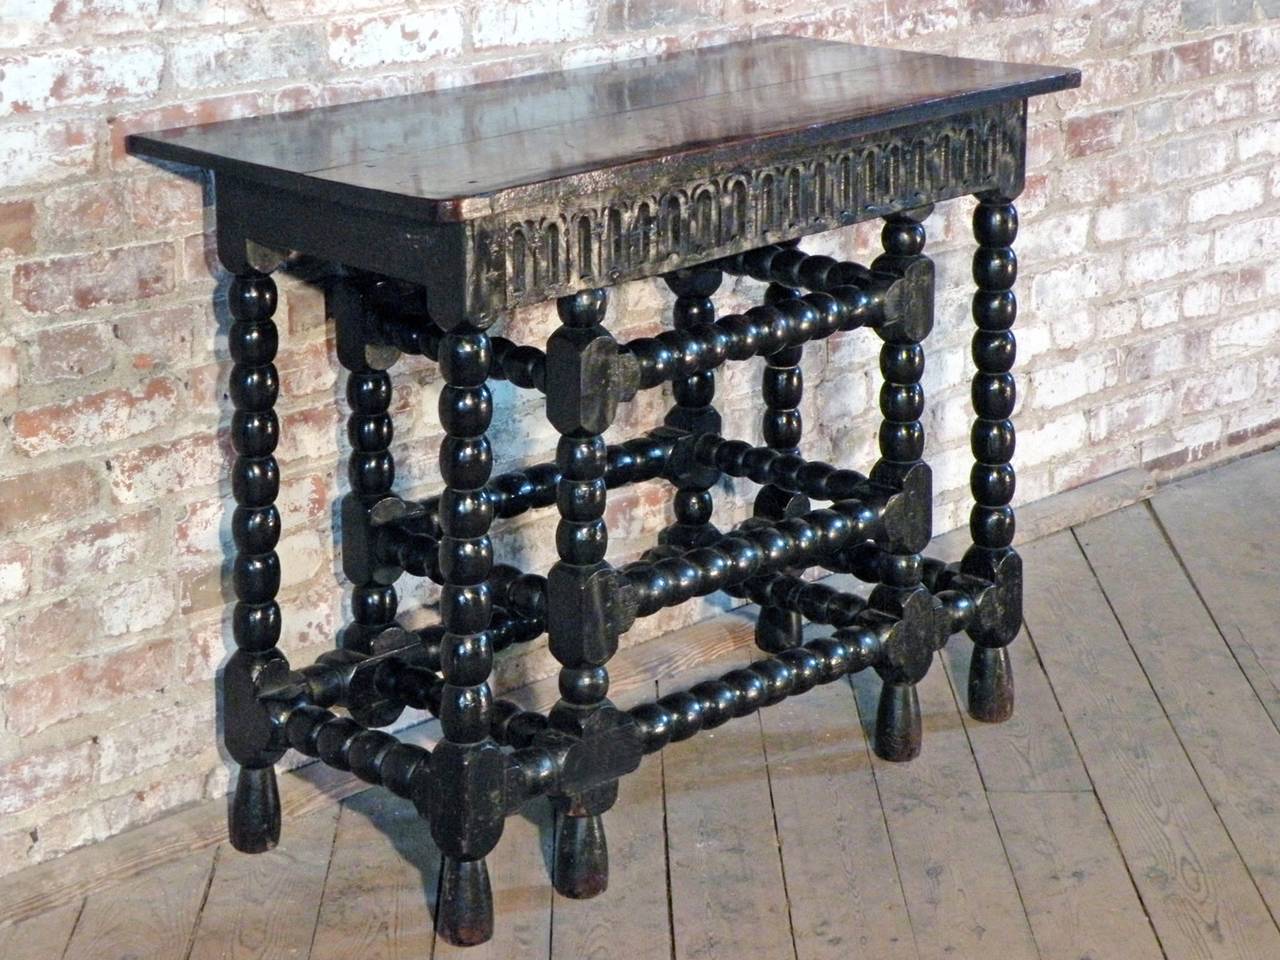 Highly unusual ebonized side / console table. A tour-de-force of bobbin-turned legs and stretchers supporting a two-board top. The black ebonizing beautifully worn off at the more exposed and touched parts. The Rhythm of interlocked vertical and